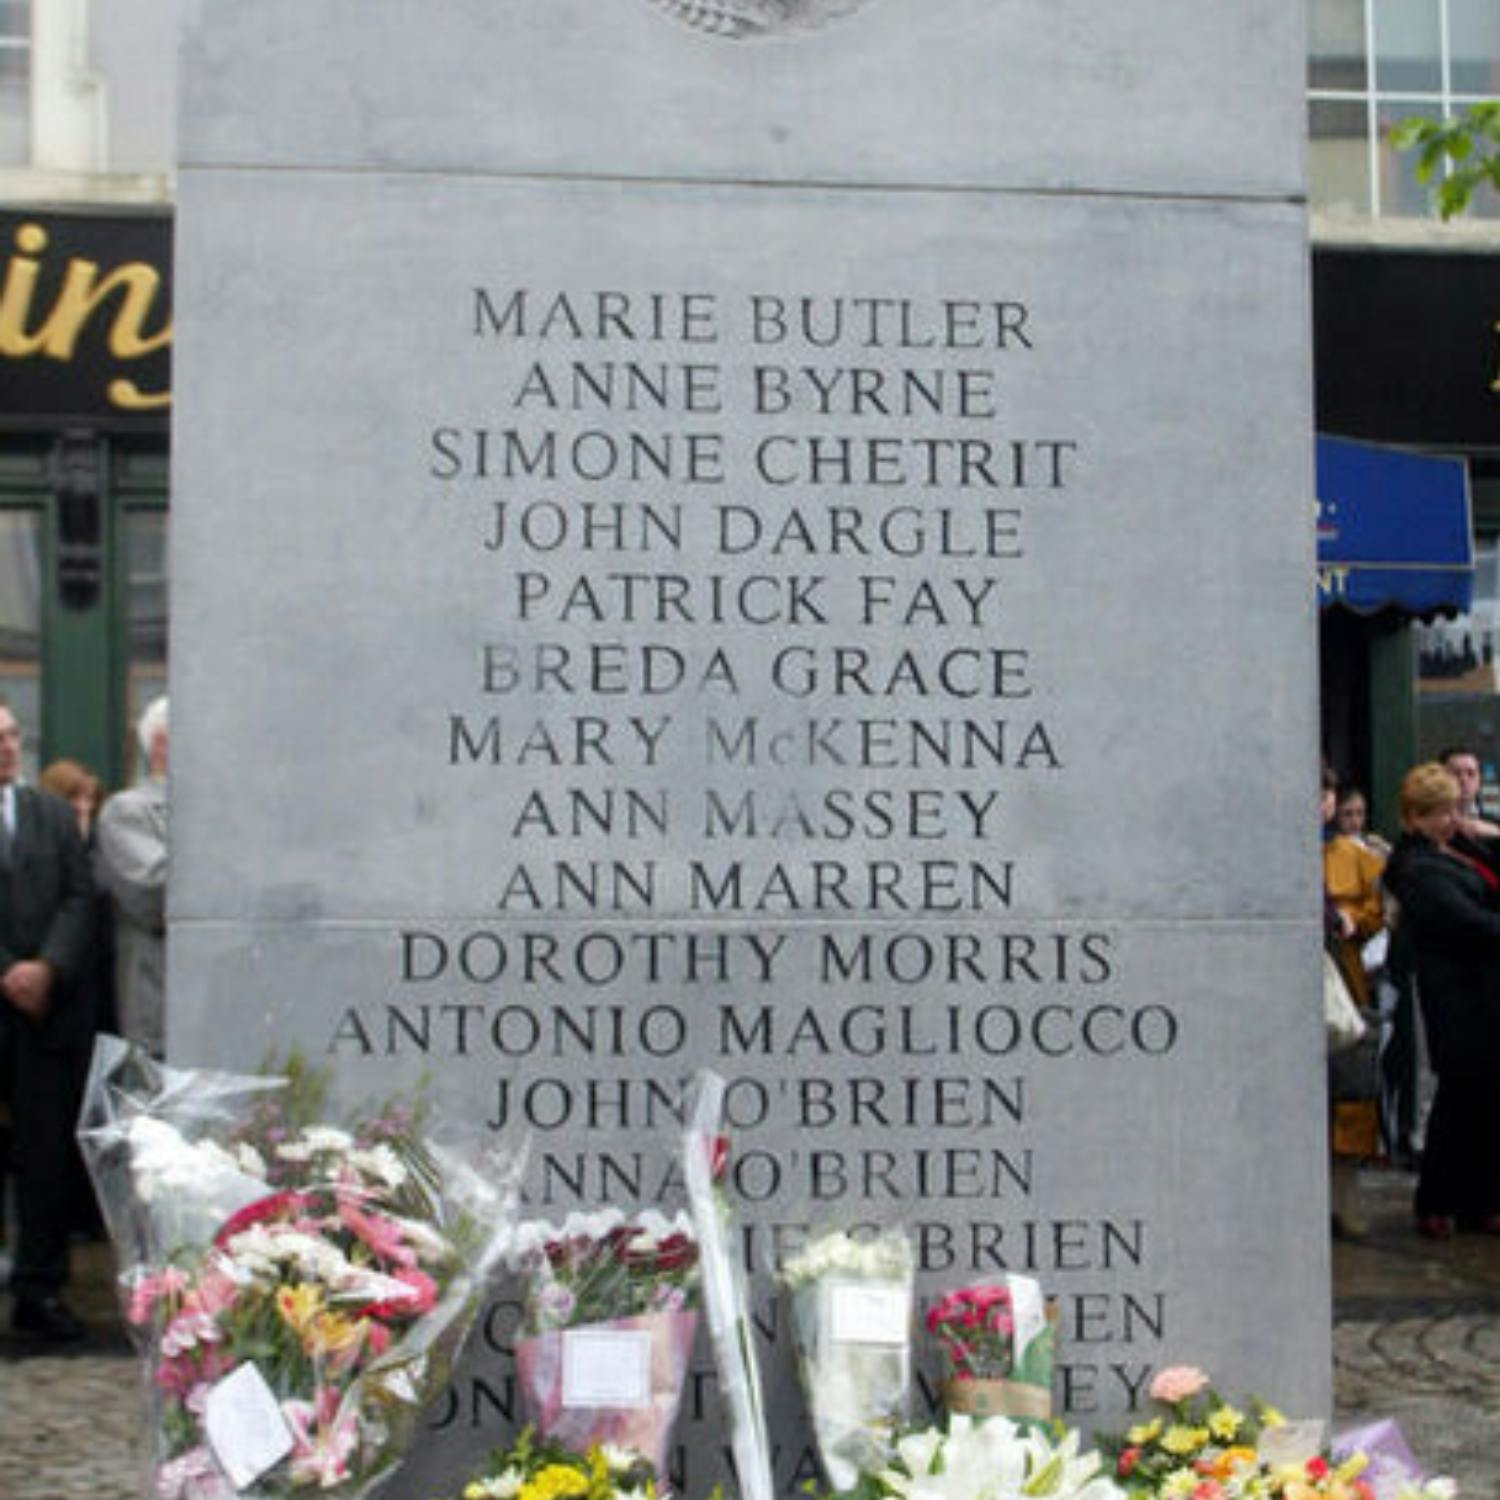 Dublin – Monaghan bombings victim families still waiting for answers